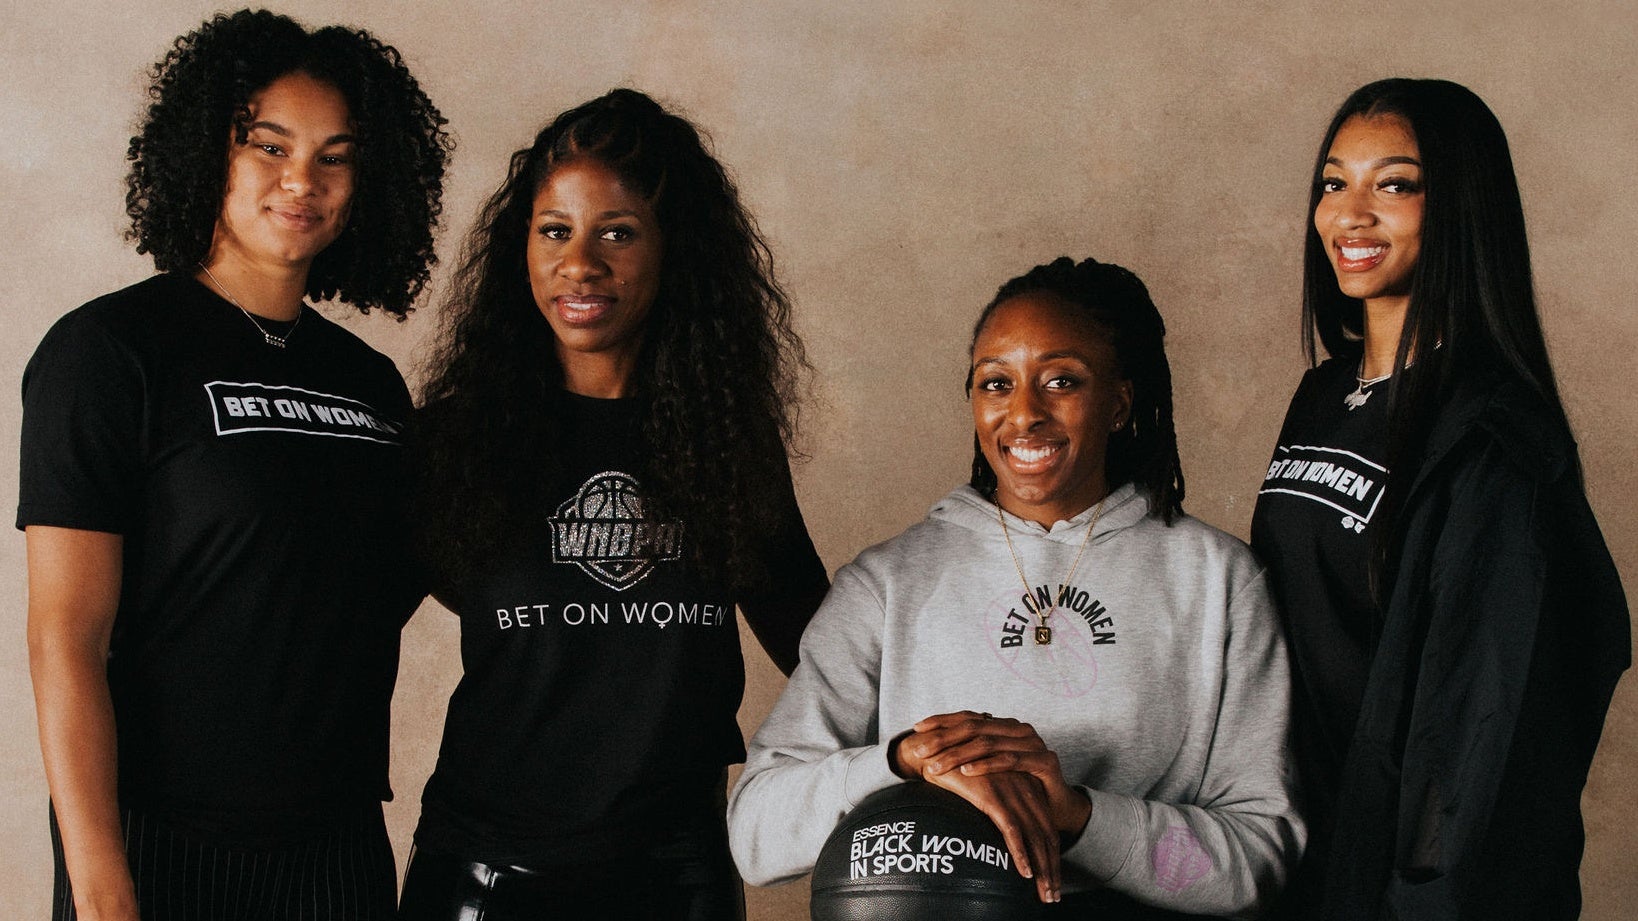 EXCLUSIVE: See Photos From ESSENCE's Black Women In Sports At The WNBPA Press Day 